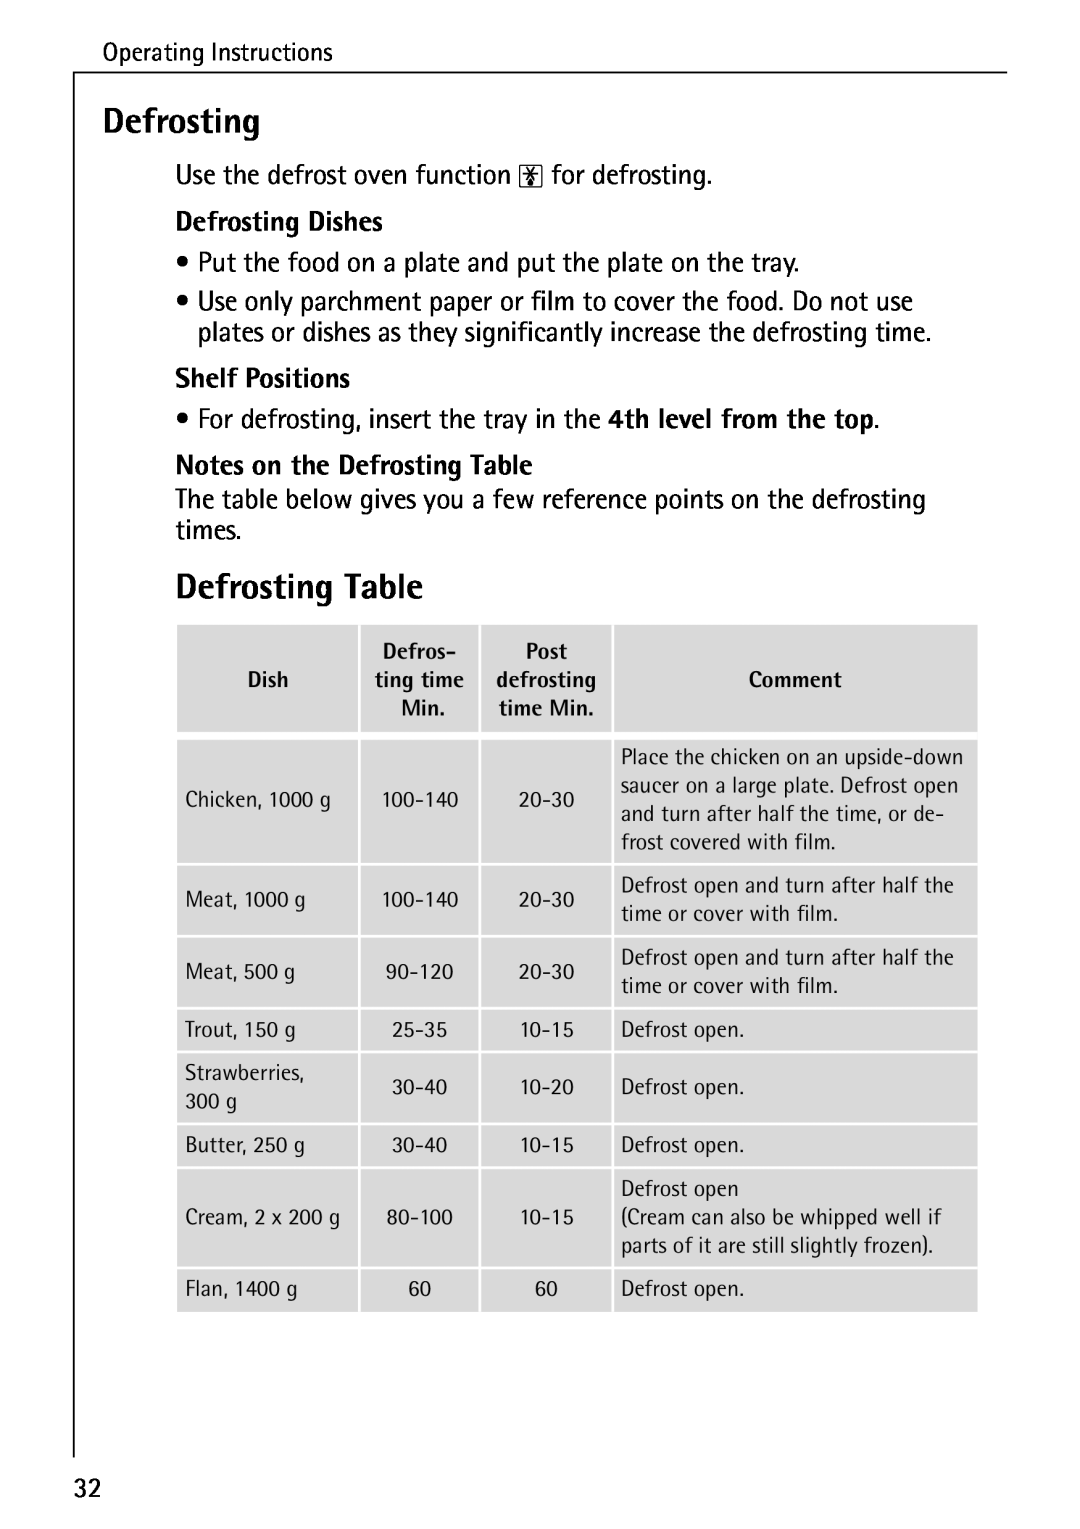 AEG 5033 V Defrosting Dishes, Notes on the Defrosting Table, Shelf Positions, Operating Instructions 